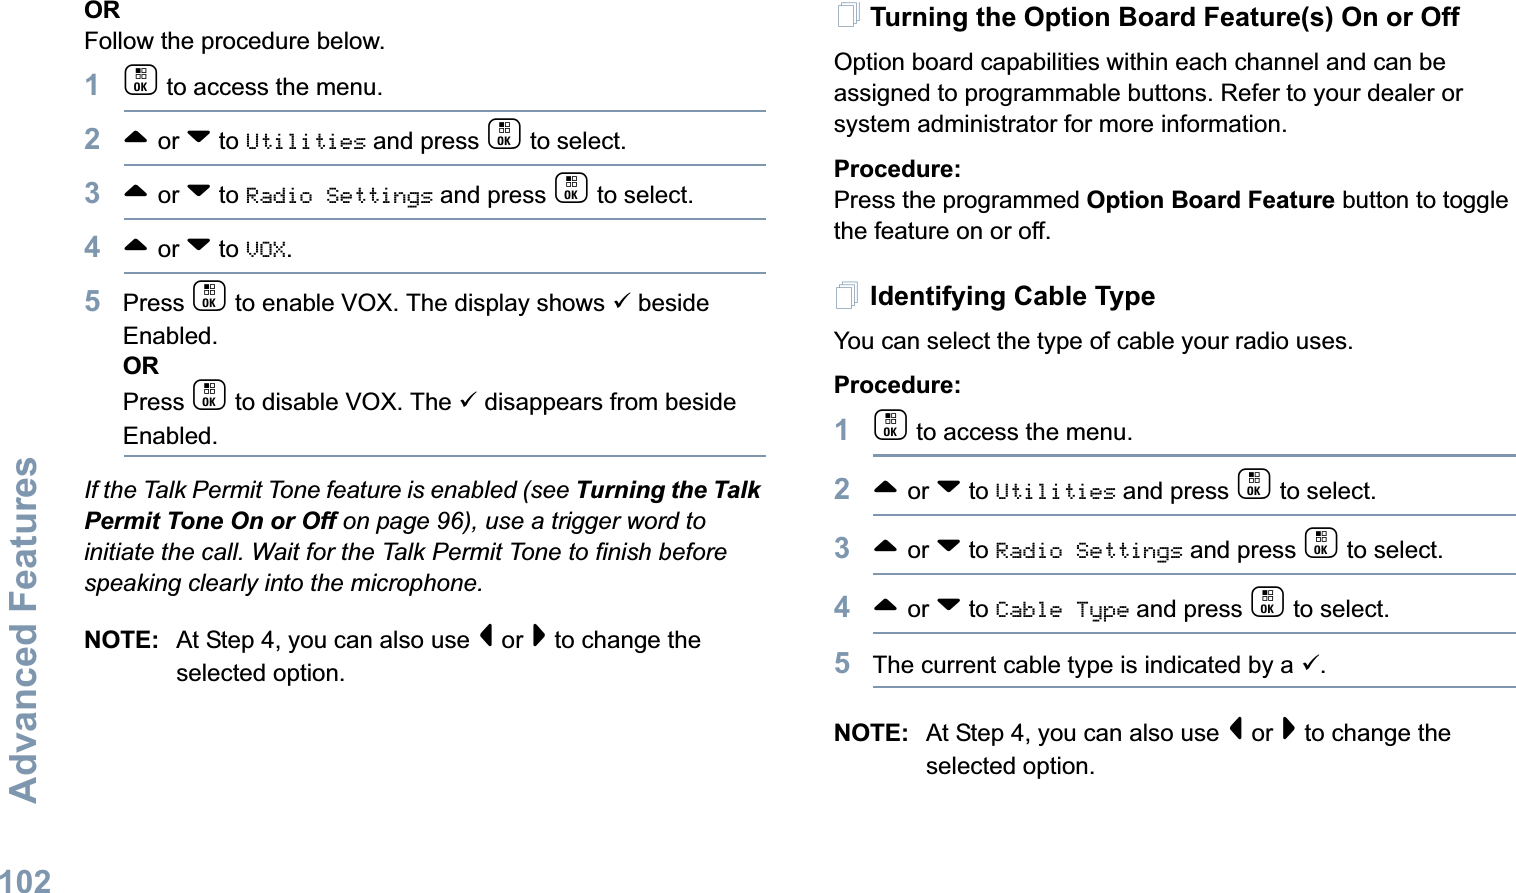 Advanced FeaturesEnglish102ORFollow the procedure below.1c to access the menu.2^ or v to Utilities and press c to select.3^ or v to Radio Settings and press c to select.4^ or v to VOX.5Press c to enable VOX. The display shows 9 beside Enabled.ORPress c to disable VOX. The 9 disappears from beside Enabled.If the Talk Permit Tone feature is enabled (see Turning the Talk Permit Tone On or Off on page 96), use a trigger word to initiate the call. Wait for the Talk Permit Tone to finish before speaking clearly into the microphone.NOTE: At Step 4, you can also use &lt; or &gt; to change the selected option.Turning the Option Board Feature(s) On or OffOption board capabilities within each channel and can be assigned to programmable buttons. Refer to your dealer or system administrator for more information.Procedure: Press the programmed Option Board Feature button to toggle the feature on or off.Identifying Cable TypeYou can select the type of cable your radio uses.Procedure: 1c to access the menu.2^ or v to Utilities and press c to select.3^ or v to Radio Settings and press c to select.4^ or v to Cable Type and press c to select.5The current cable type is indicated by a 9.NOTE: At Step 4, you can also use &lt; or &gt; to change the selected option.